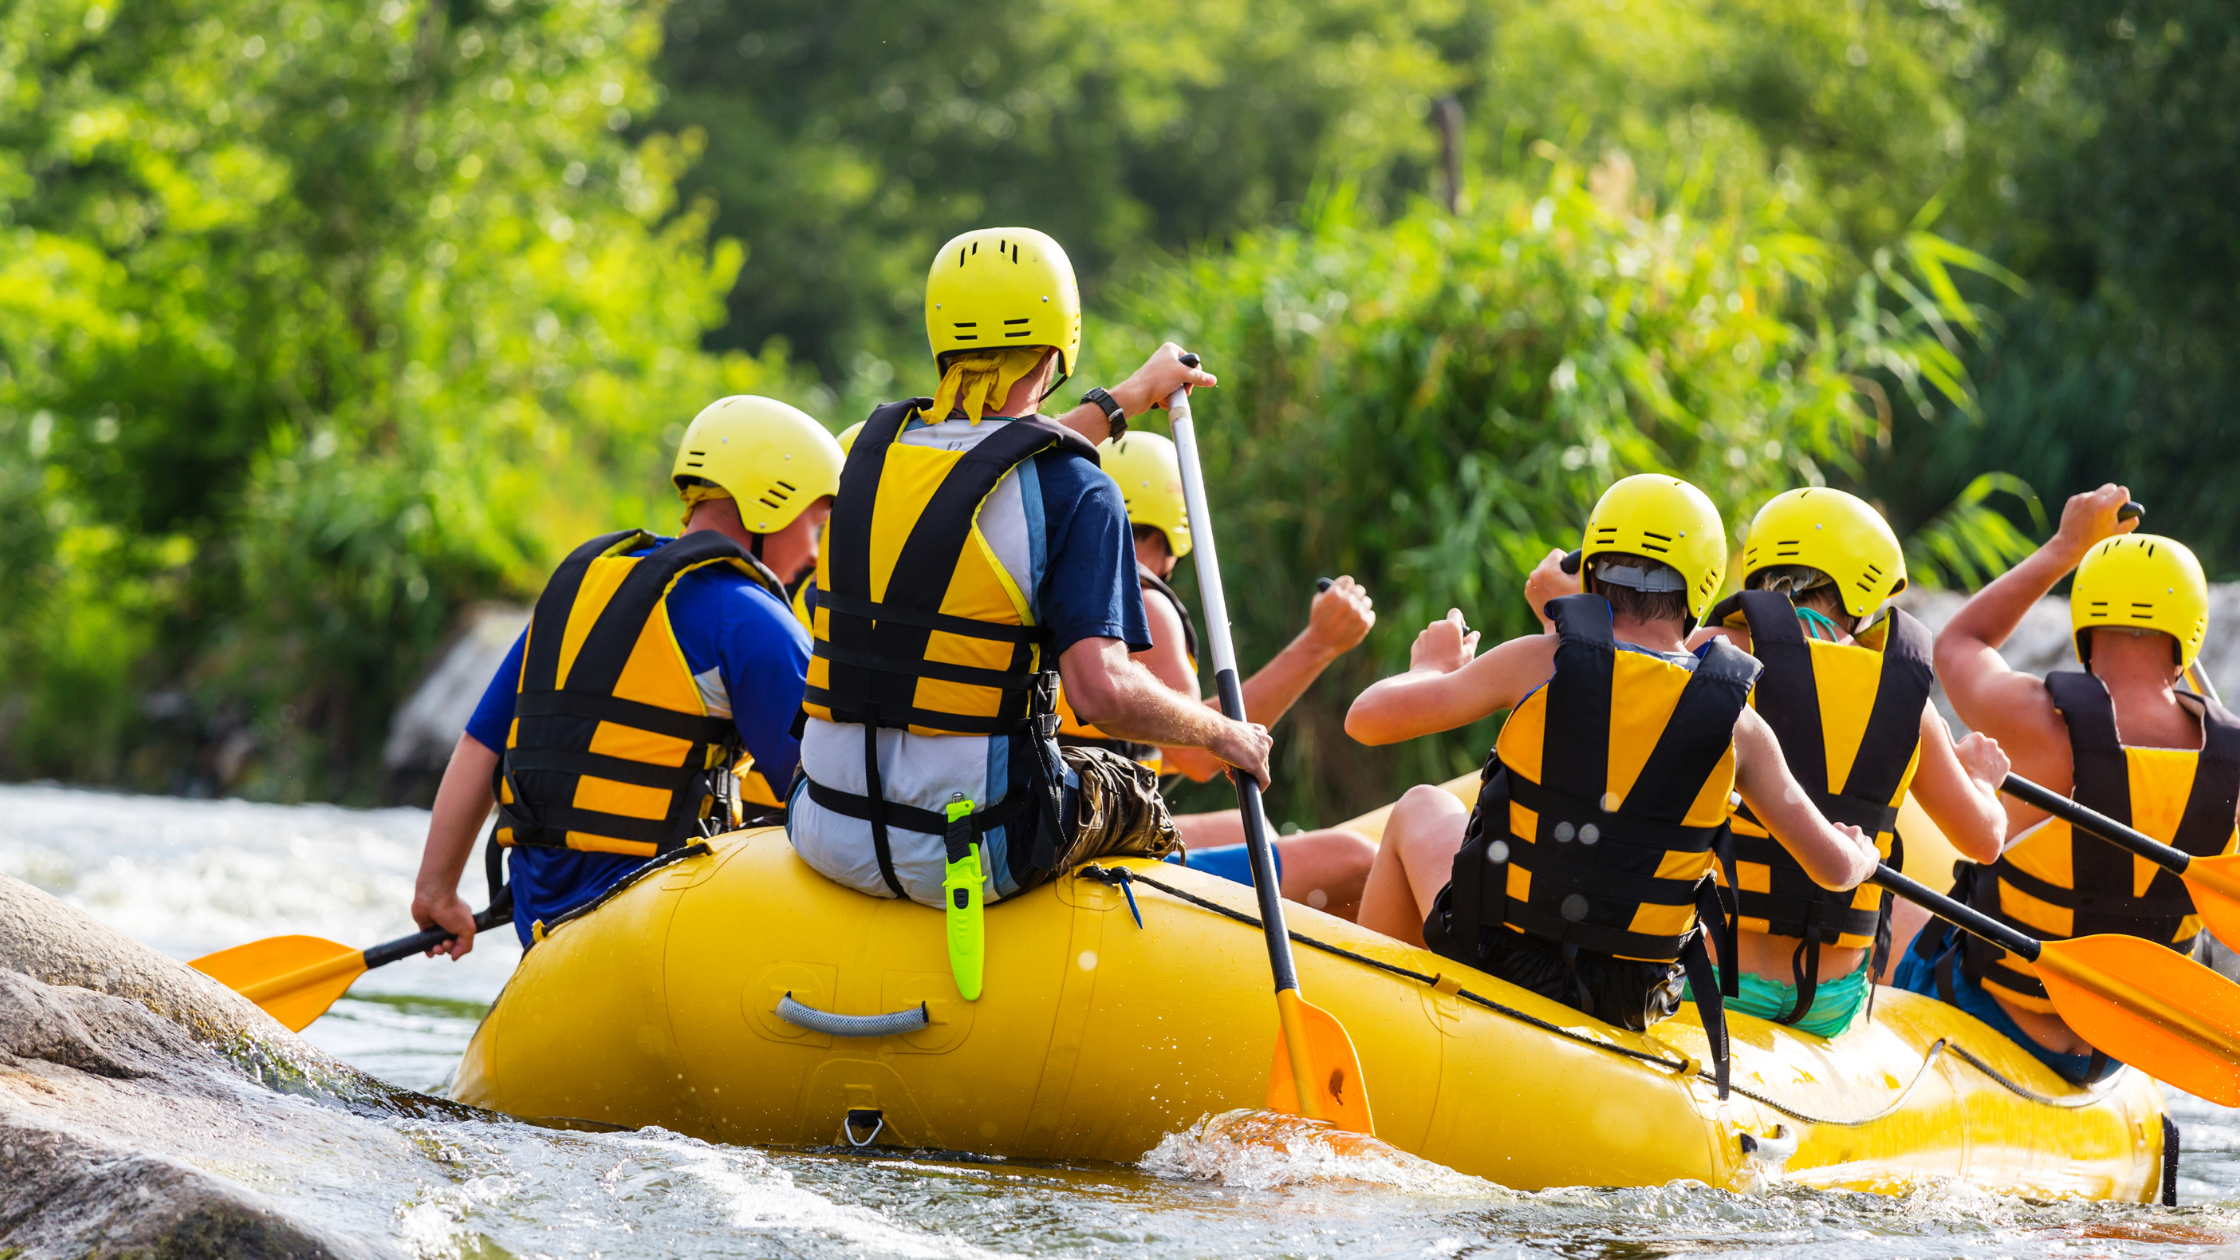 photo of a group of people white water rafting as a team